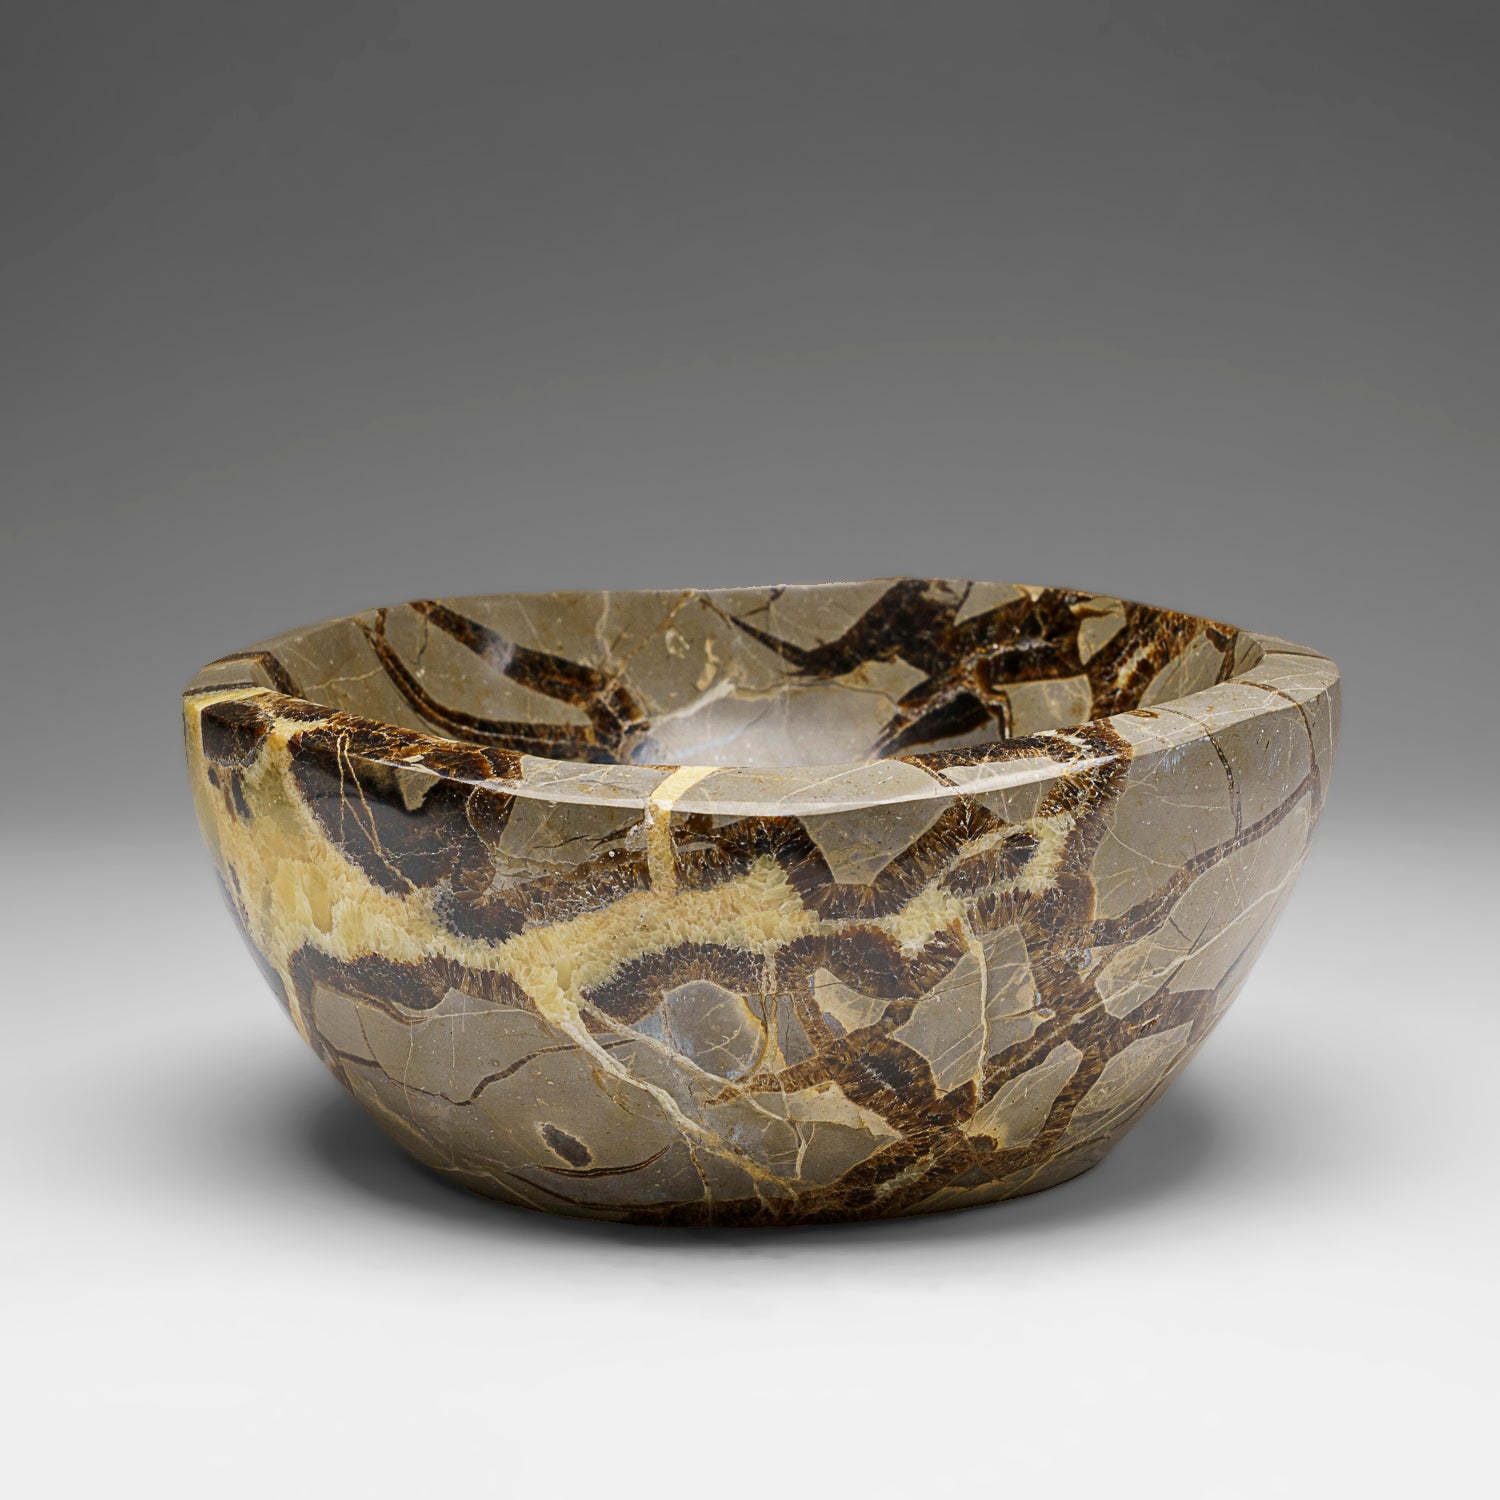 Genuine Polished Septarian Bowl from Madagascar (4.3 lbs)